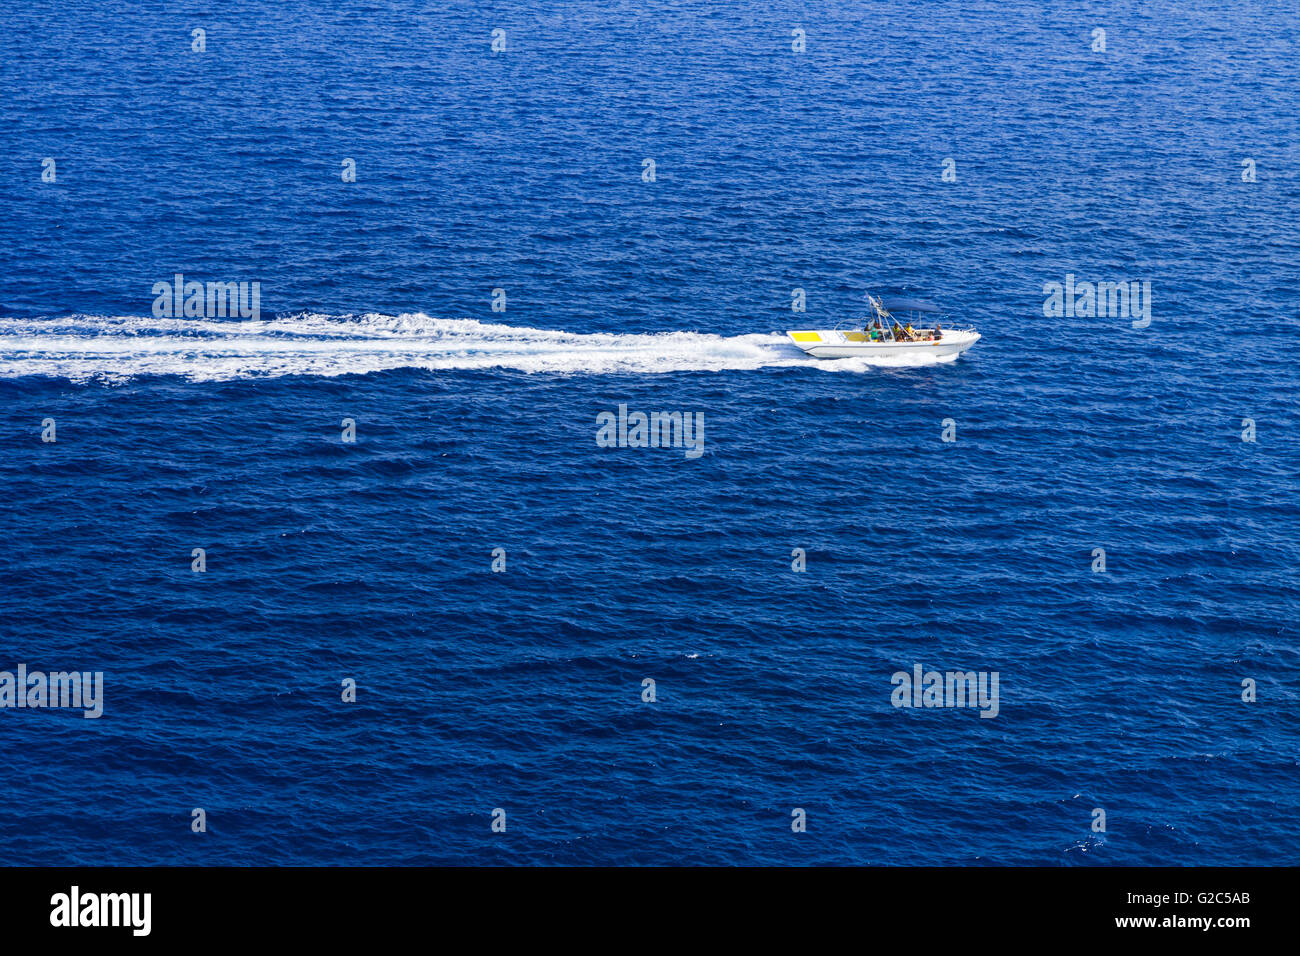 Kolymbia beach with the rocky coast in Greece. Motorboat and speed  in blue sea. Stock Photo